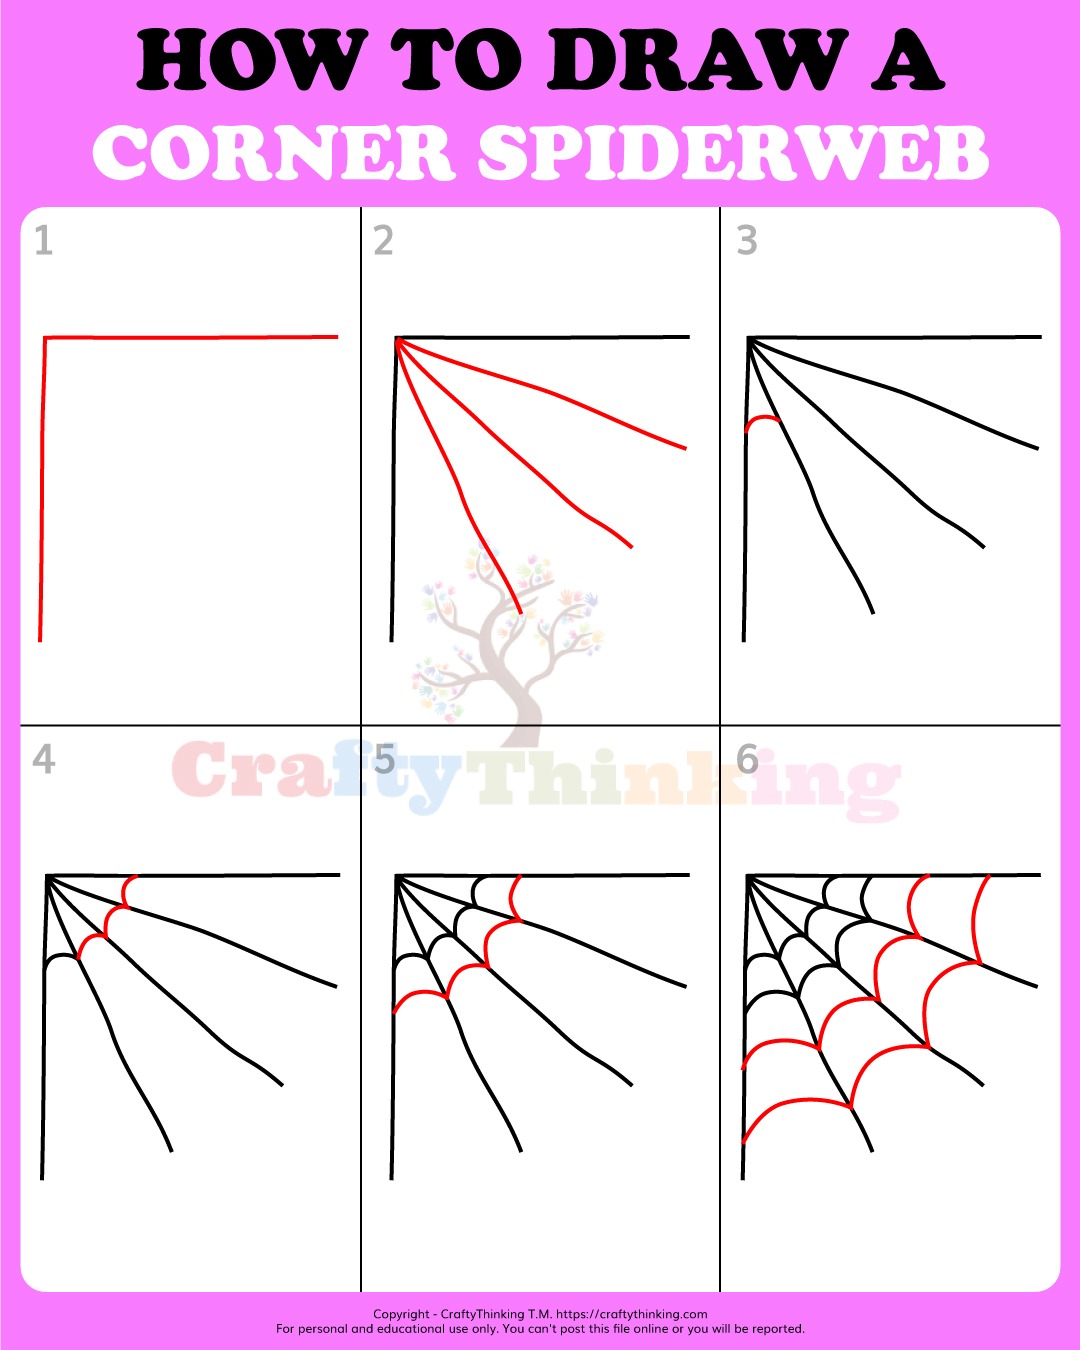 How To Draw A Spiderweb Step By Step Cobweb Drawing Tutorial Images